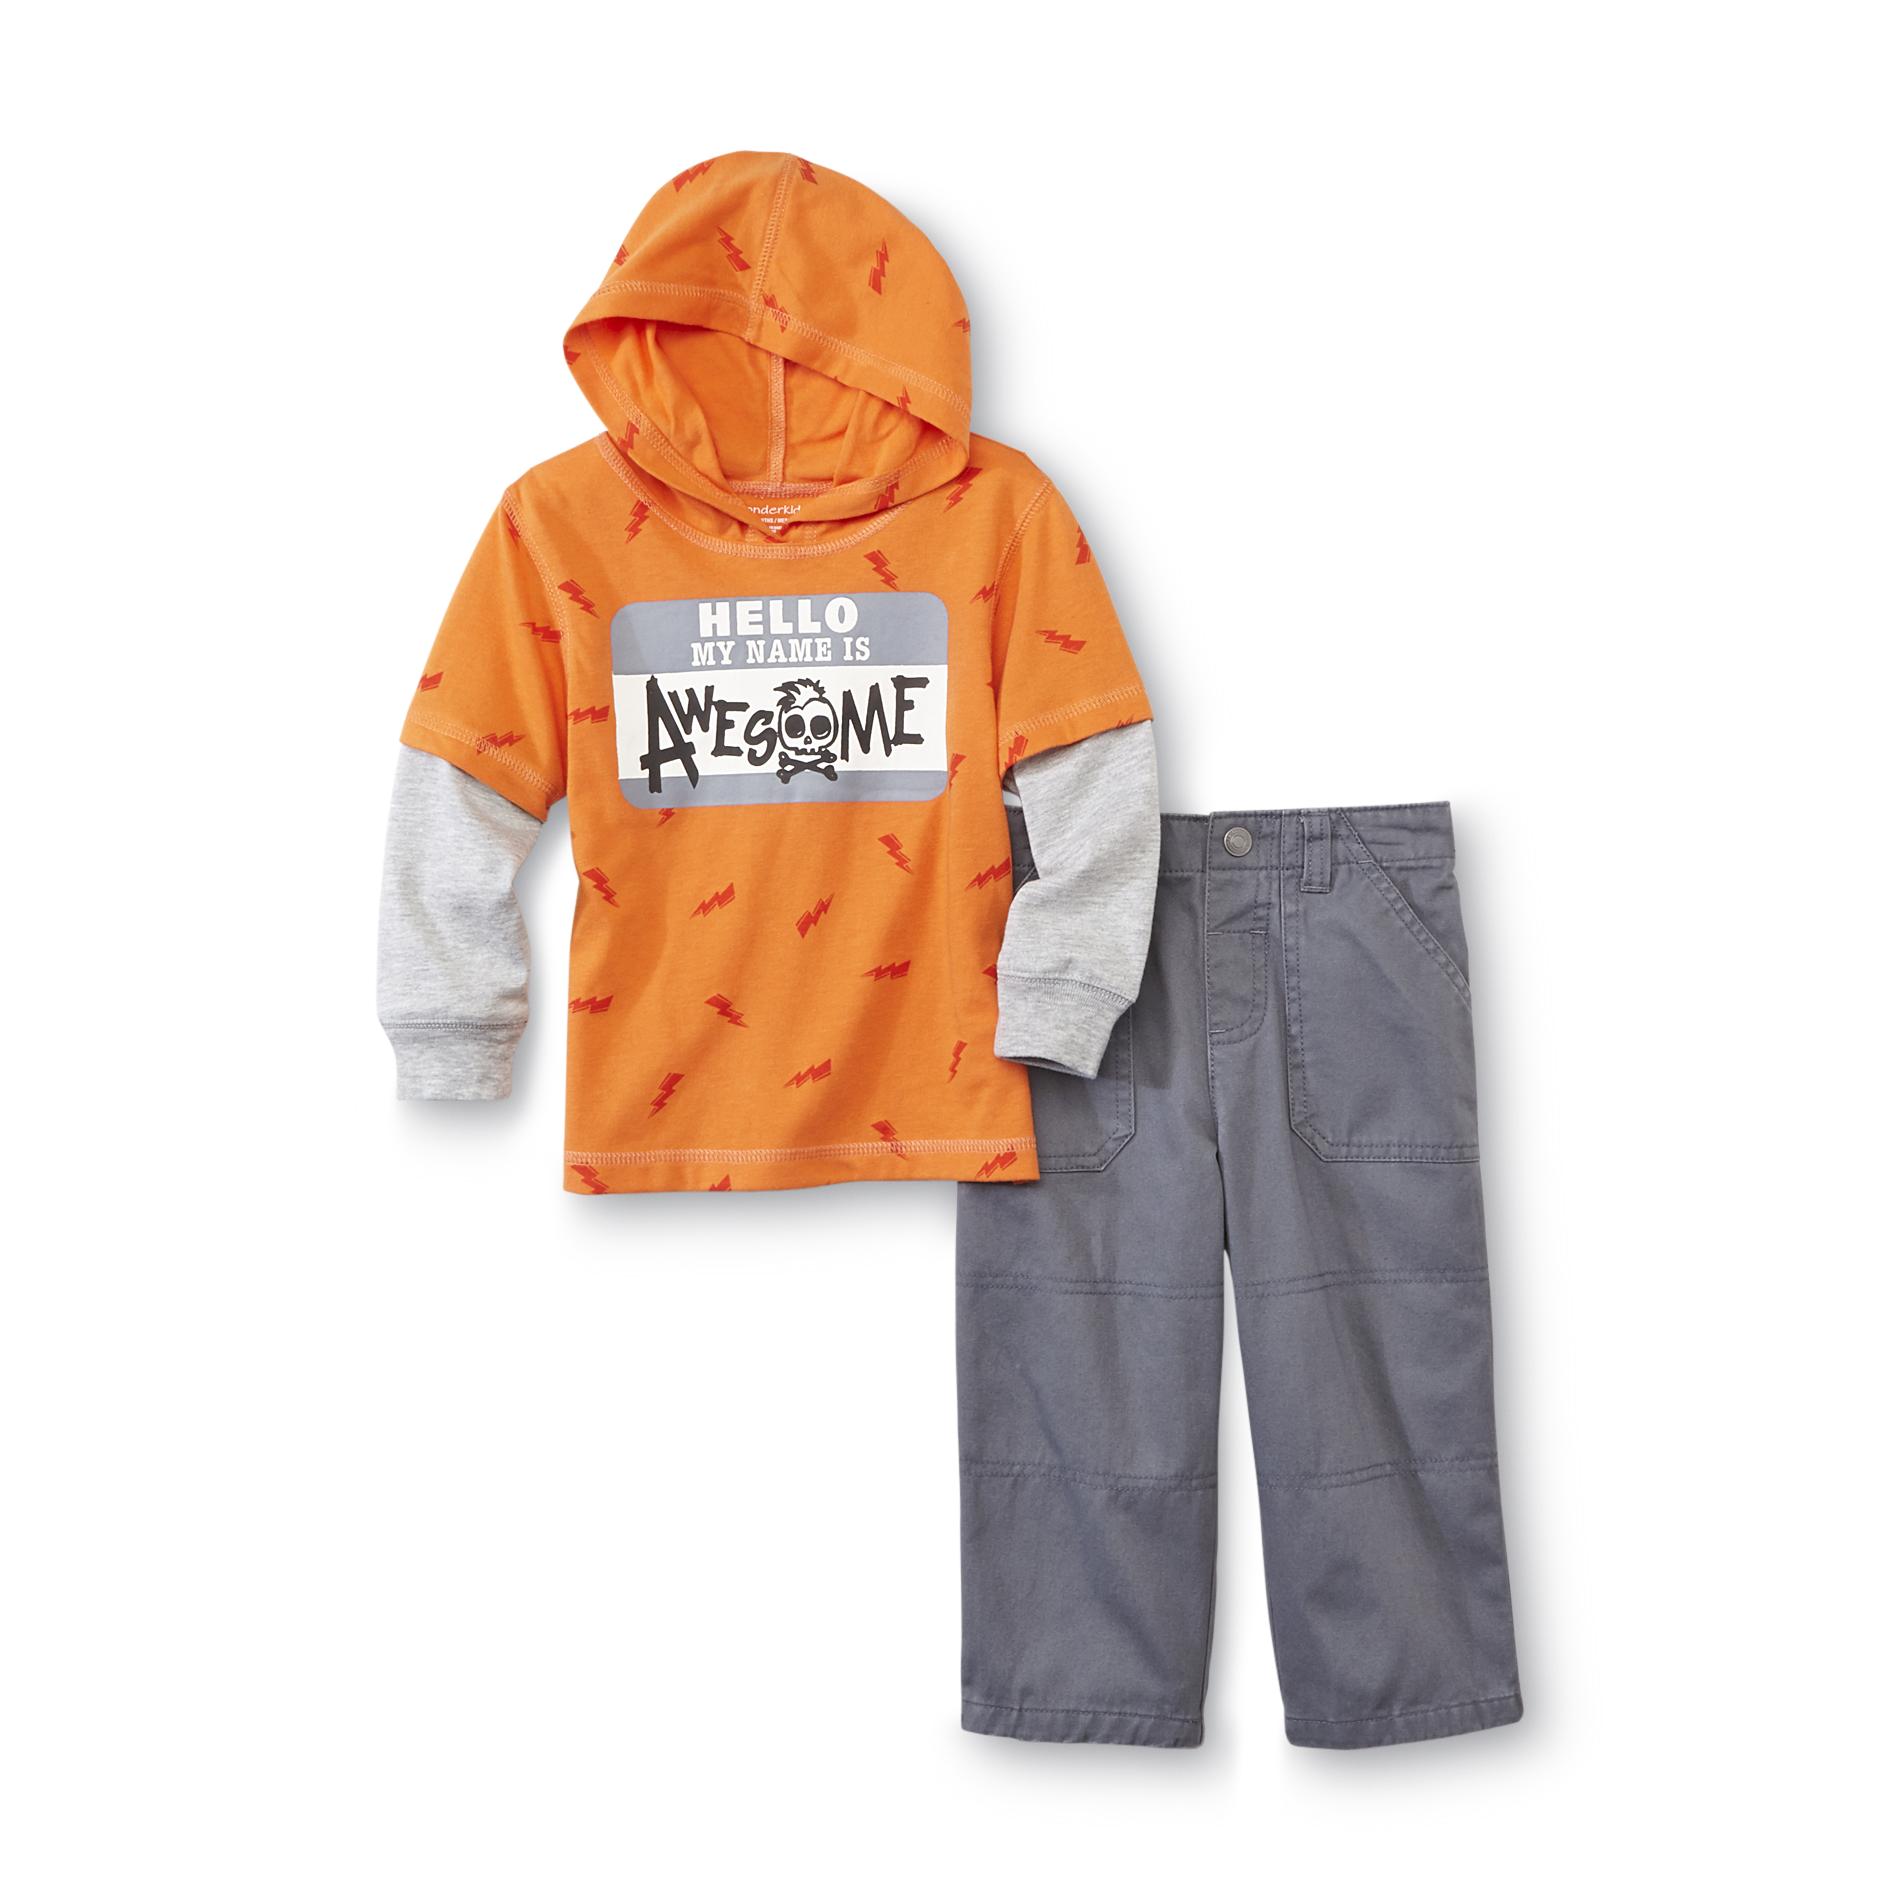 WonderKids Infant & Toddler Boy's Layered-Look Hoodie & Pants - Awesome